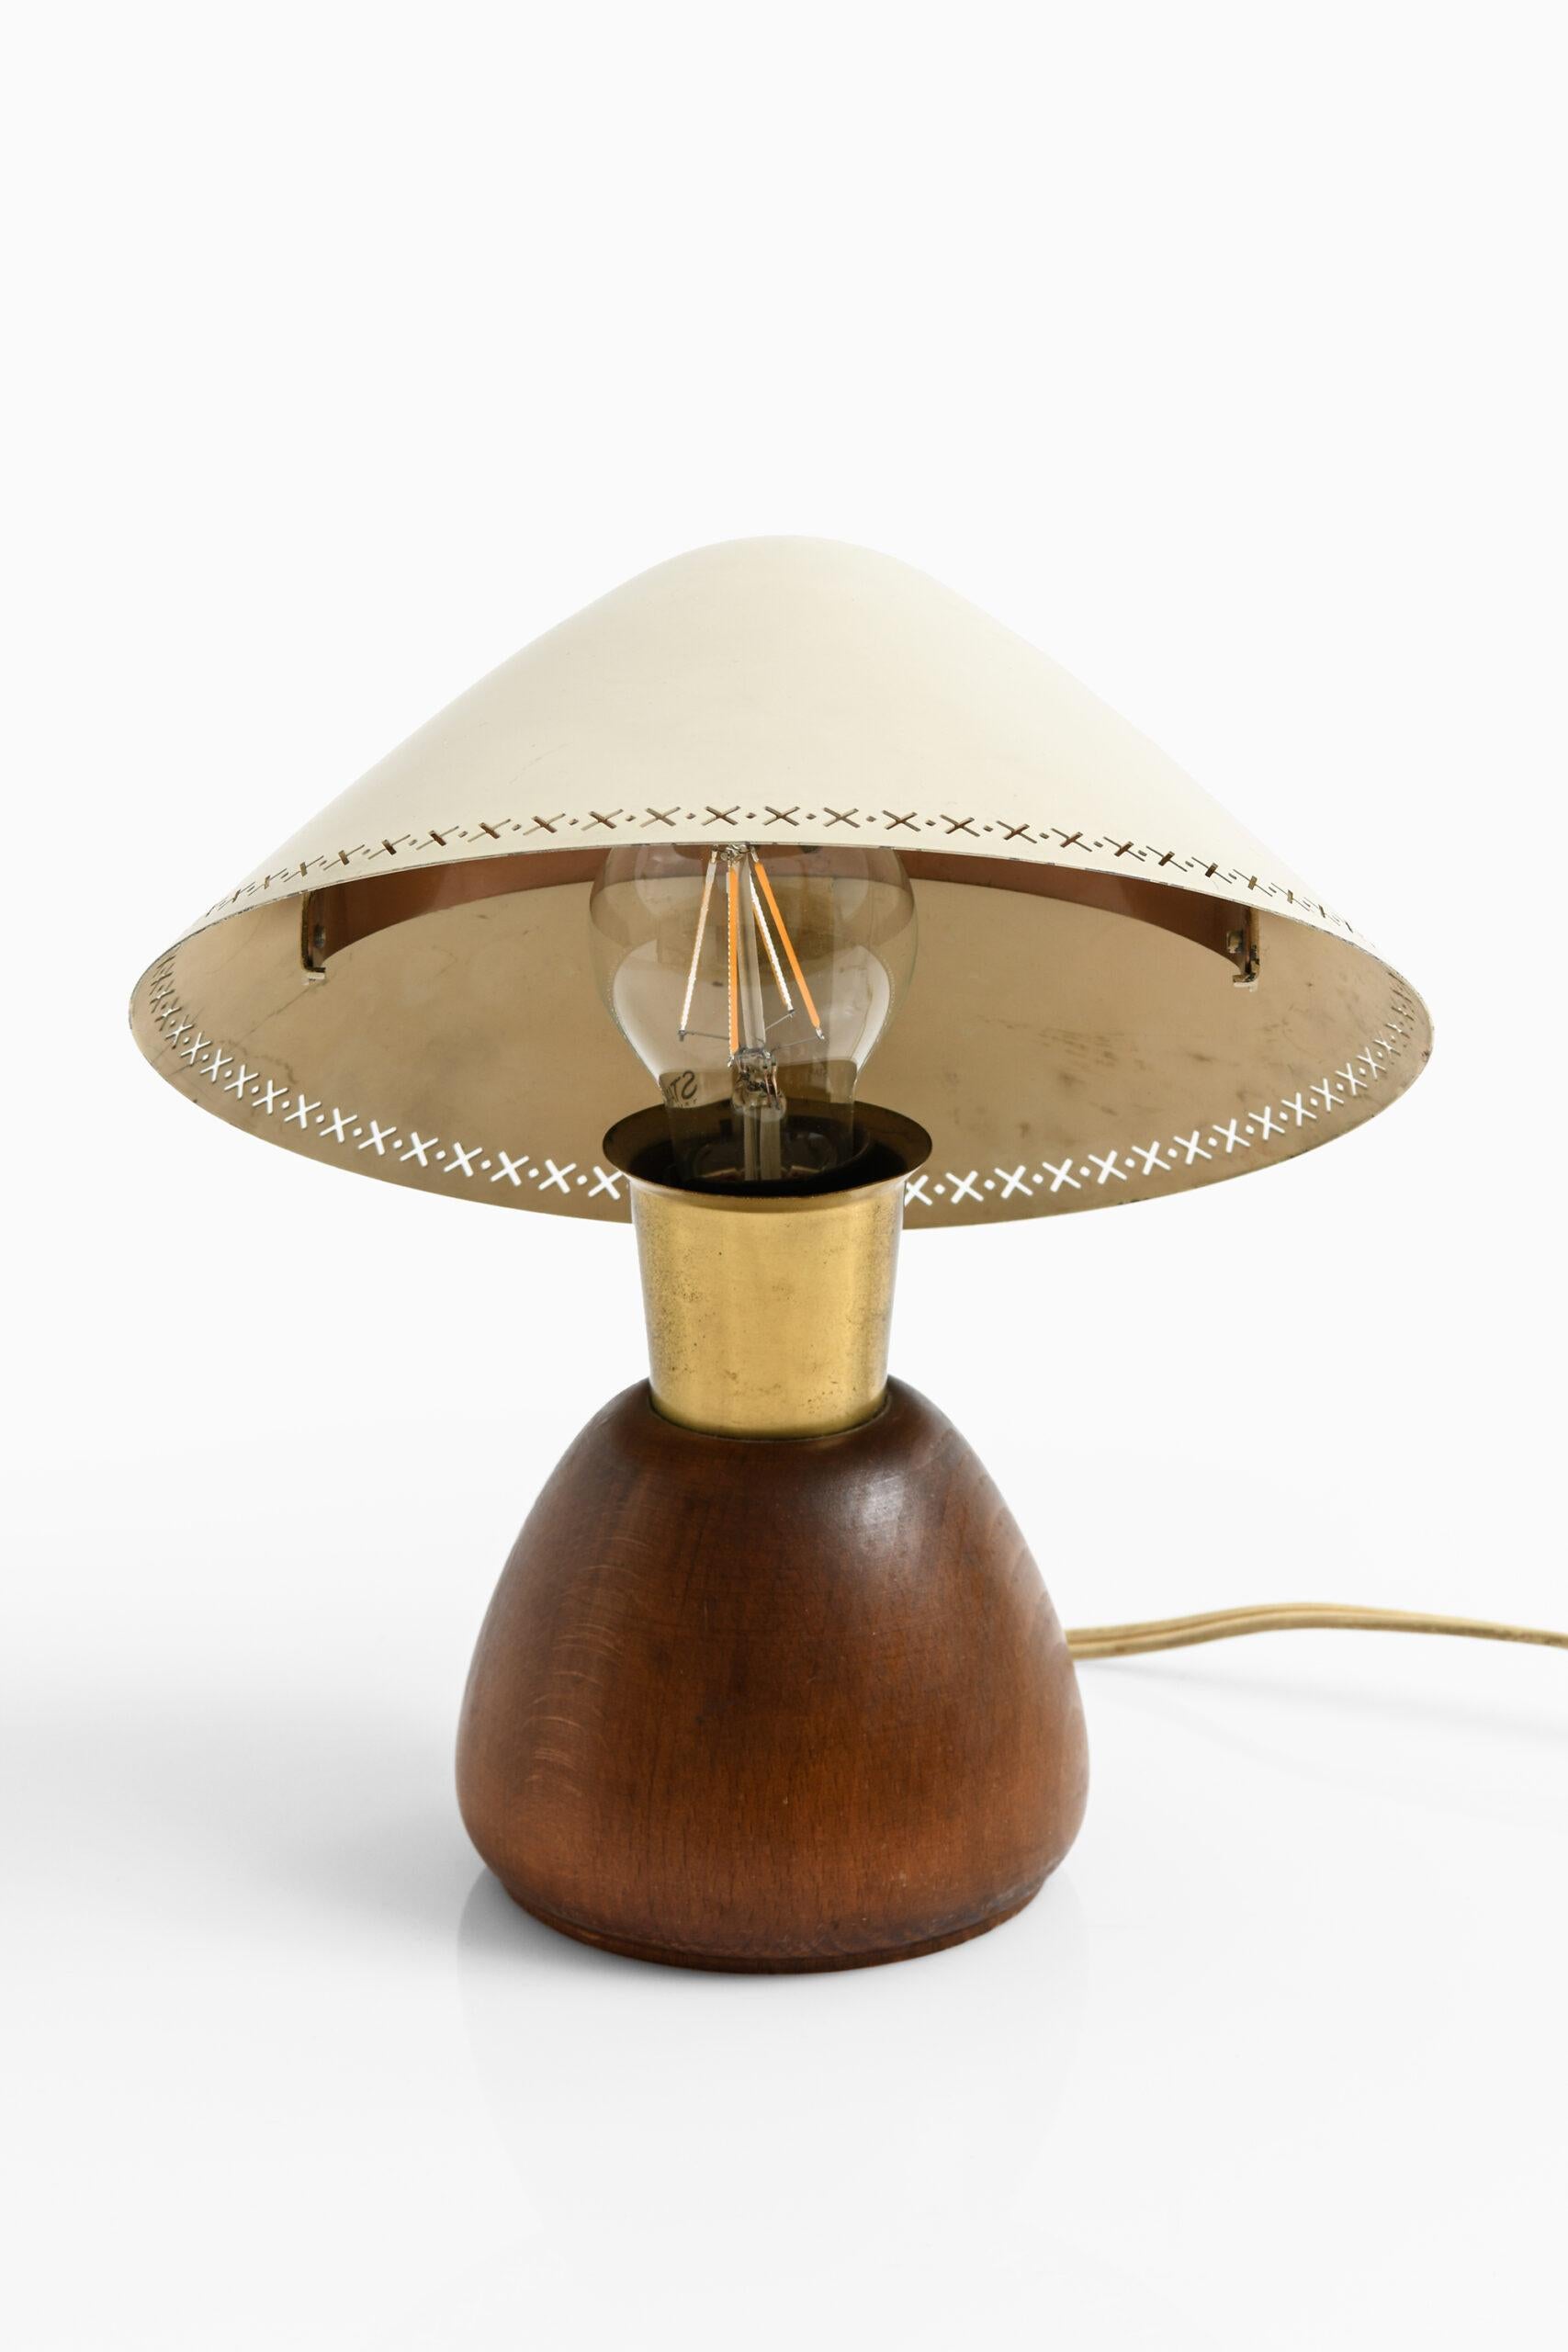 Rare pair of table lamps with adjustable shade by unknown designer. Produced by ASEA in Sweden.